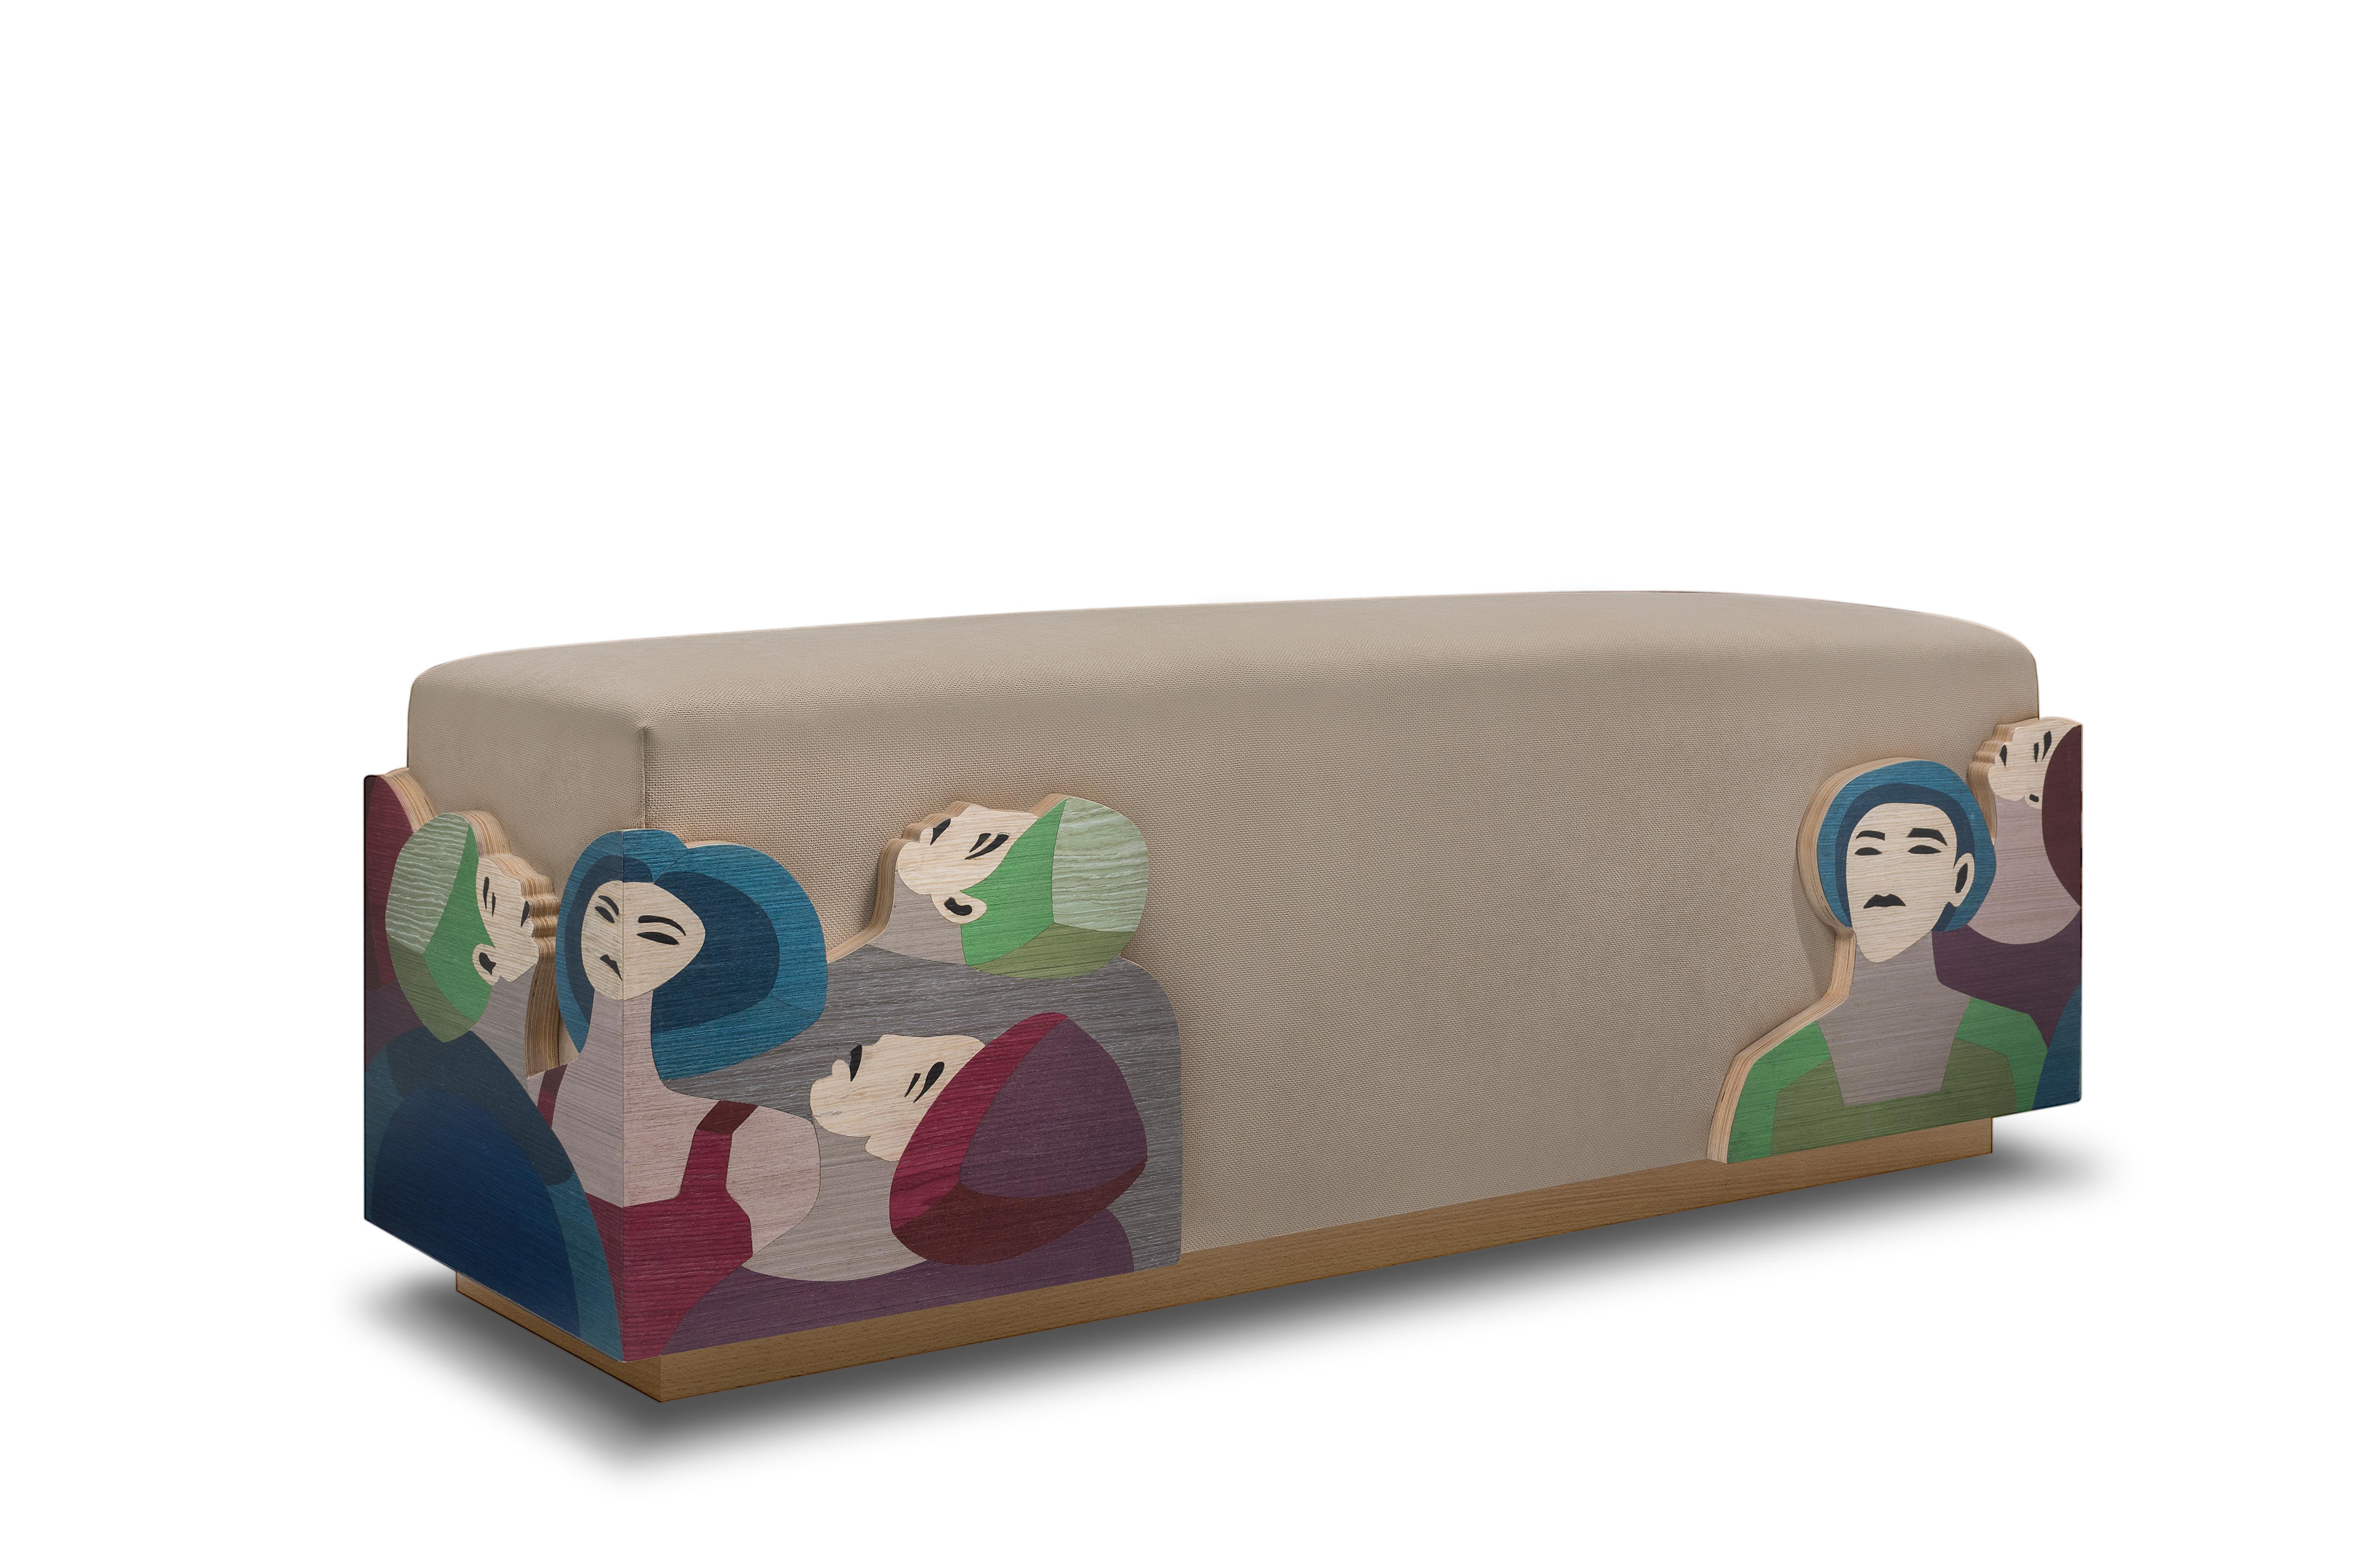 The Dreamers Bench is a captivating piece inspired by Hady Boraey's painting of the same name. Crafted with wood veneers and upholstery, this bench embodies the dream-like and imaginative qualities depicted in Boraey's artwork. The wood veneers